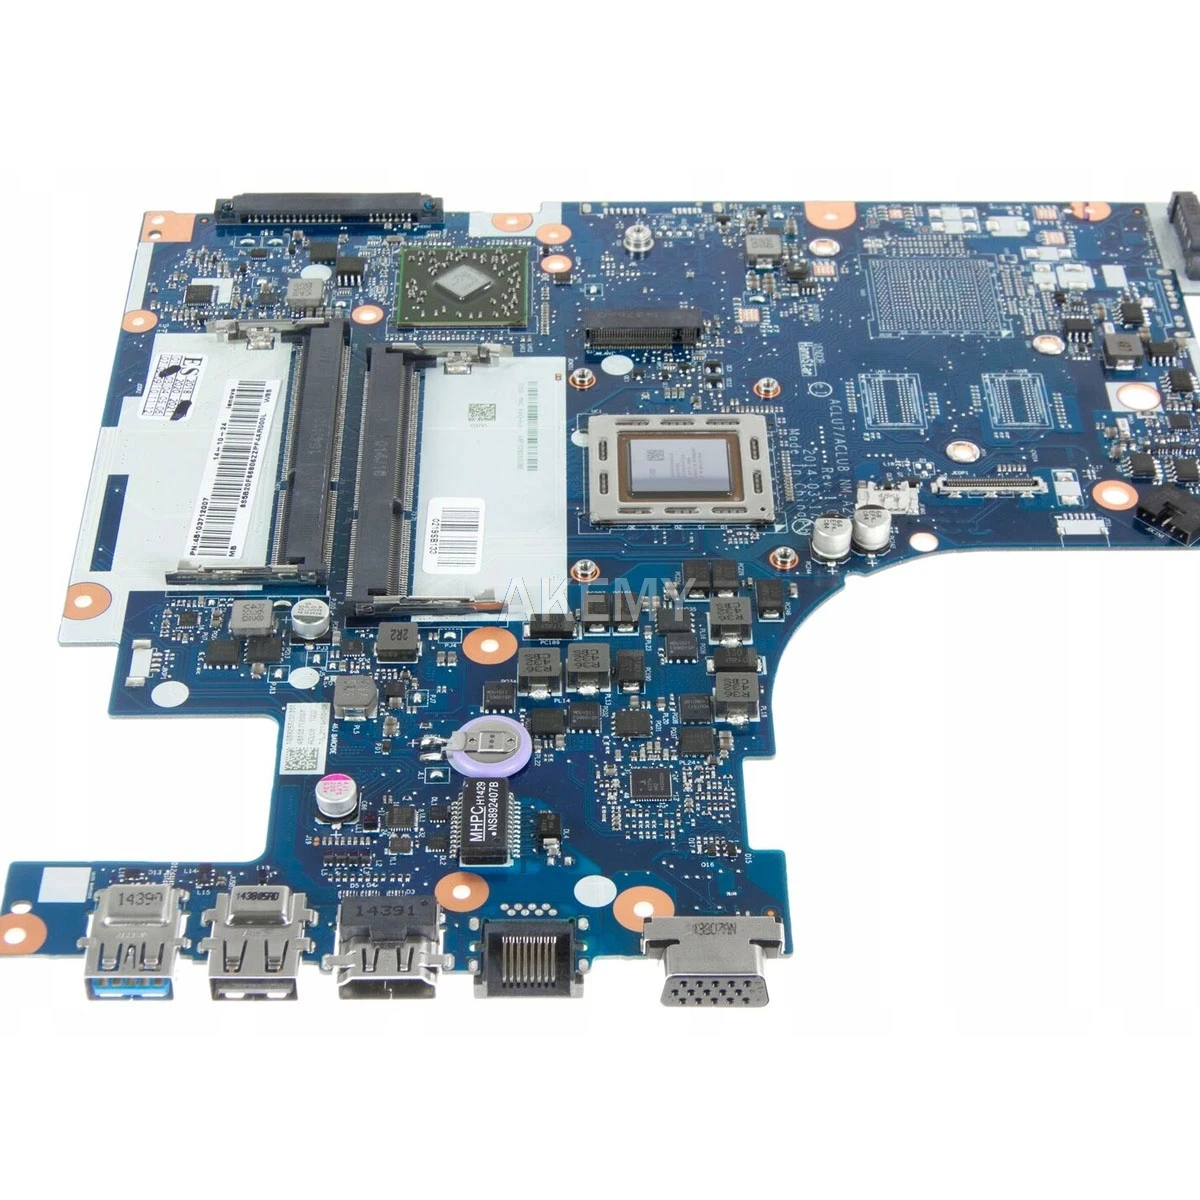 

ACLU7 / ACLU8 NM-A291 For Lenovo Z50-75 G50-75M notebook motherboard CPU A10-7300 DDR3 100% test work